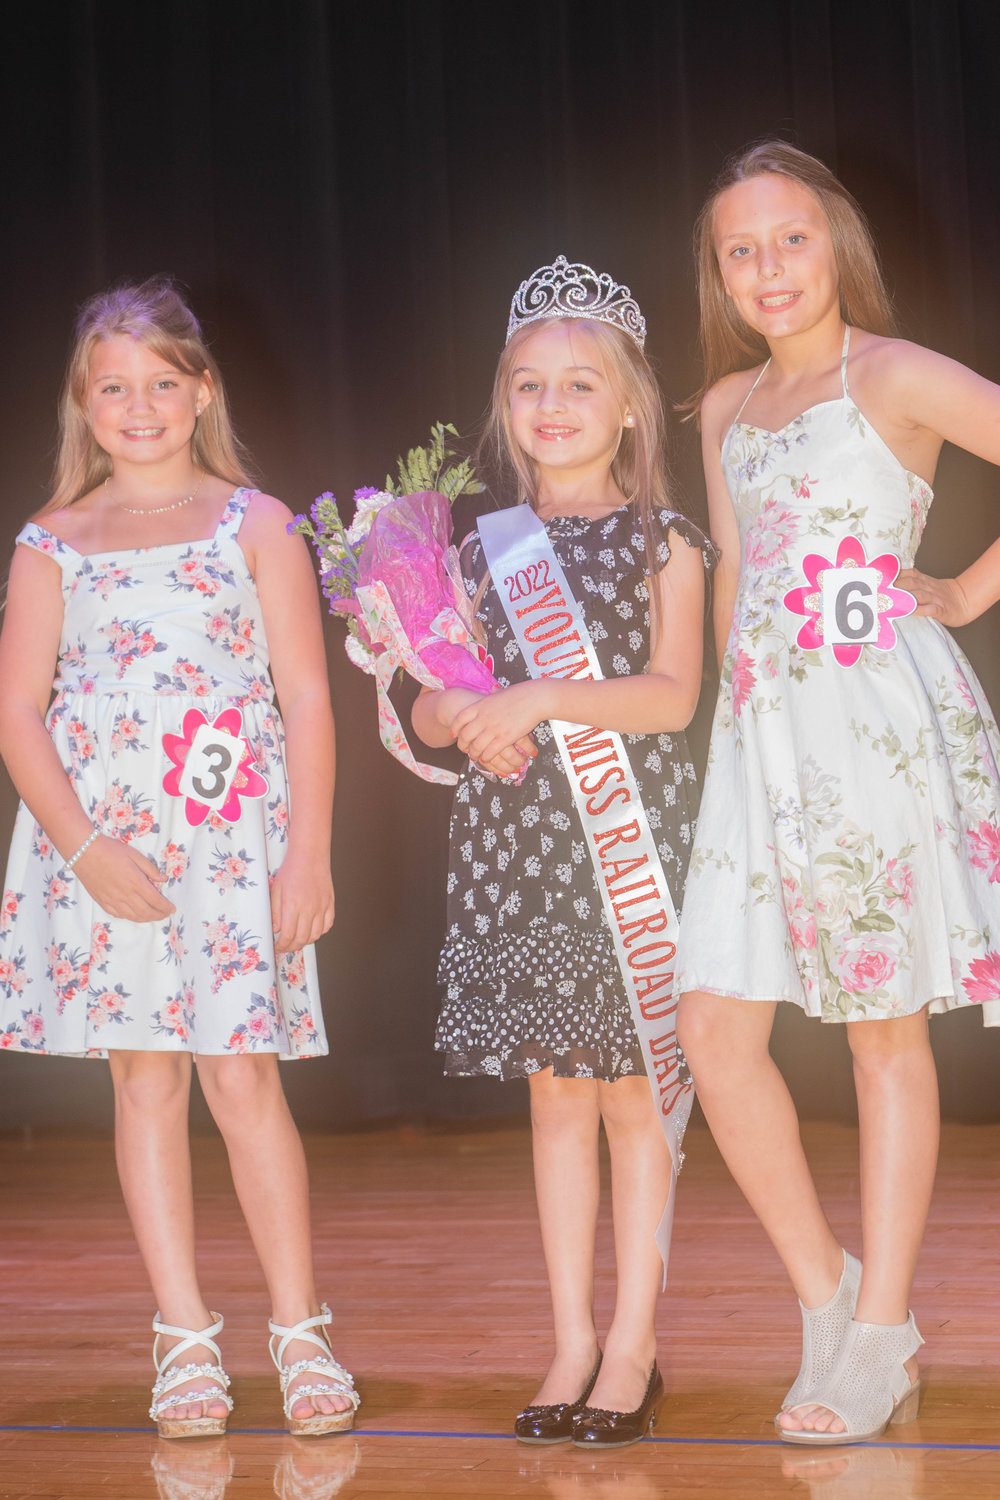 Second runner up Kenlee Lawrence, Young Miss Railroad Days Georgia Graff and first runner up Teagan Neal pose for photos after the Railroad Days pageant Sunday Night.